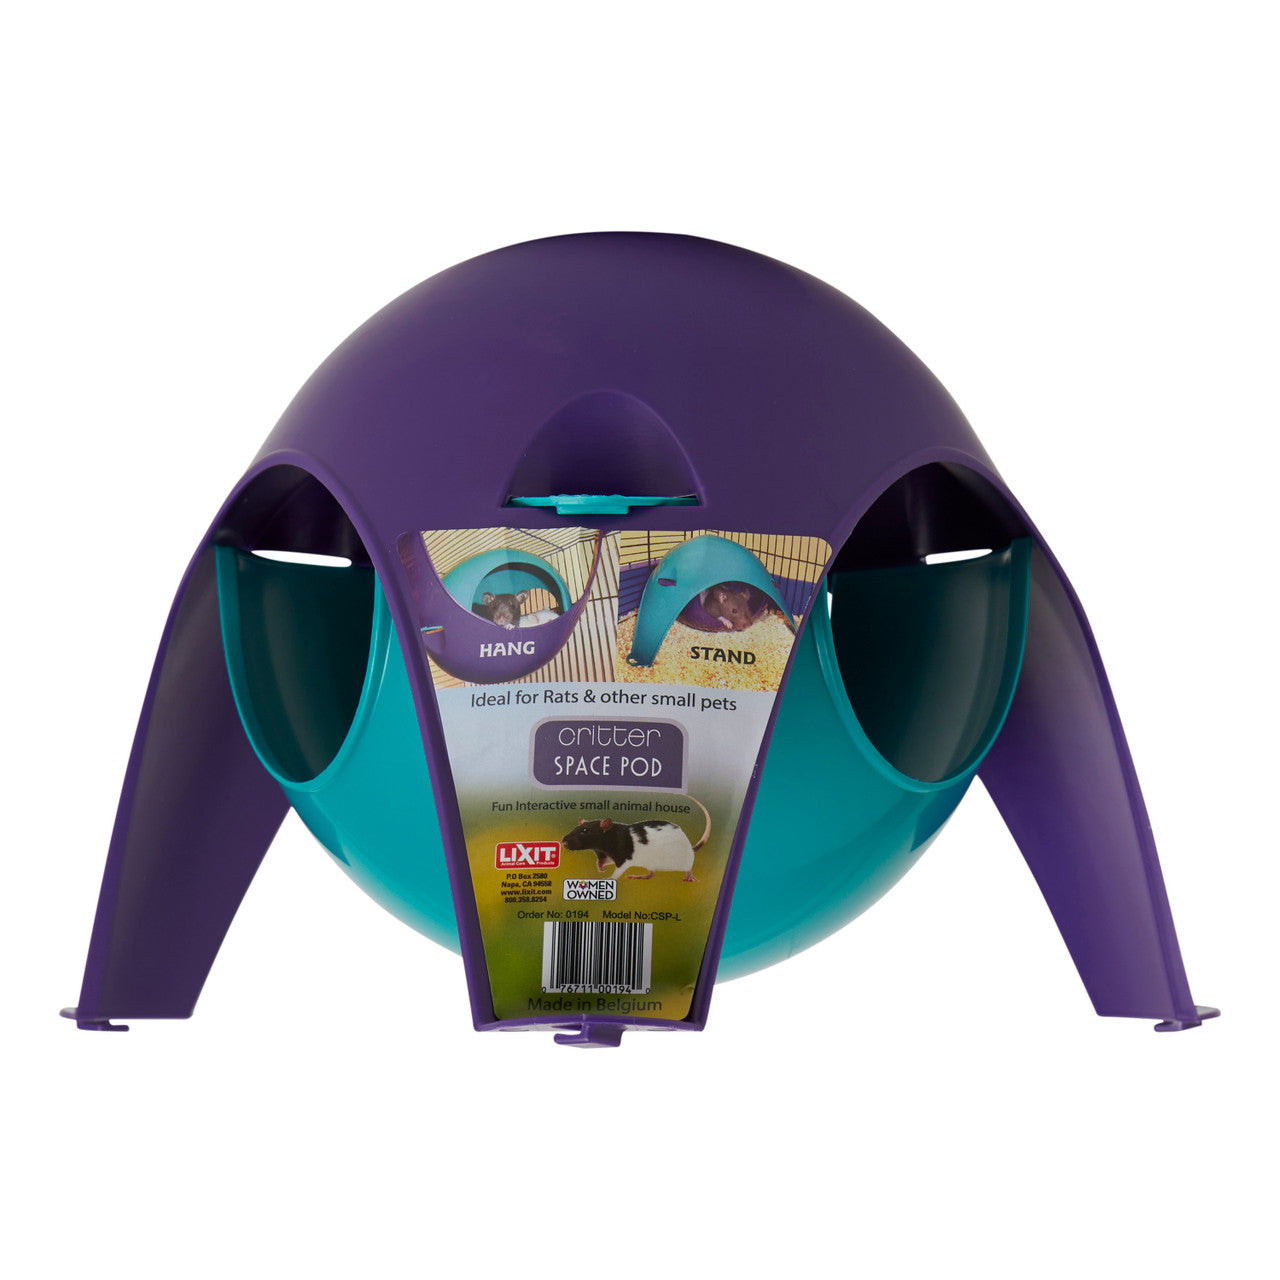 Lixit Critter Space Pod Small Animal House Purple/Blue LG